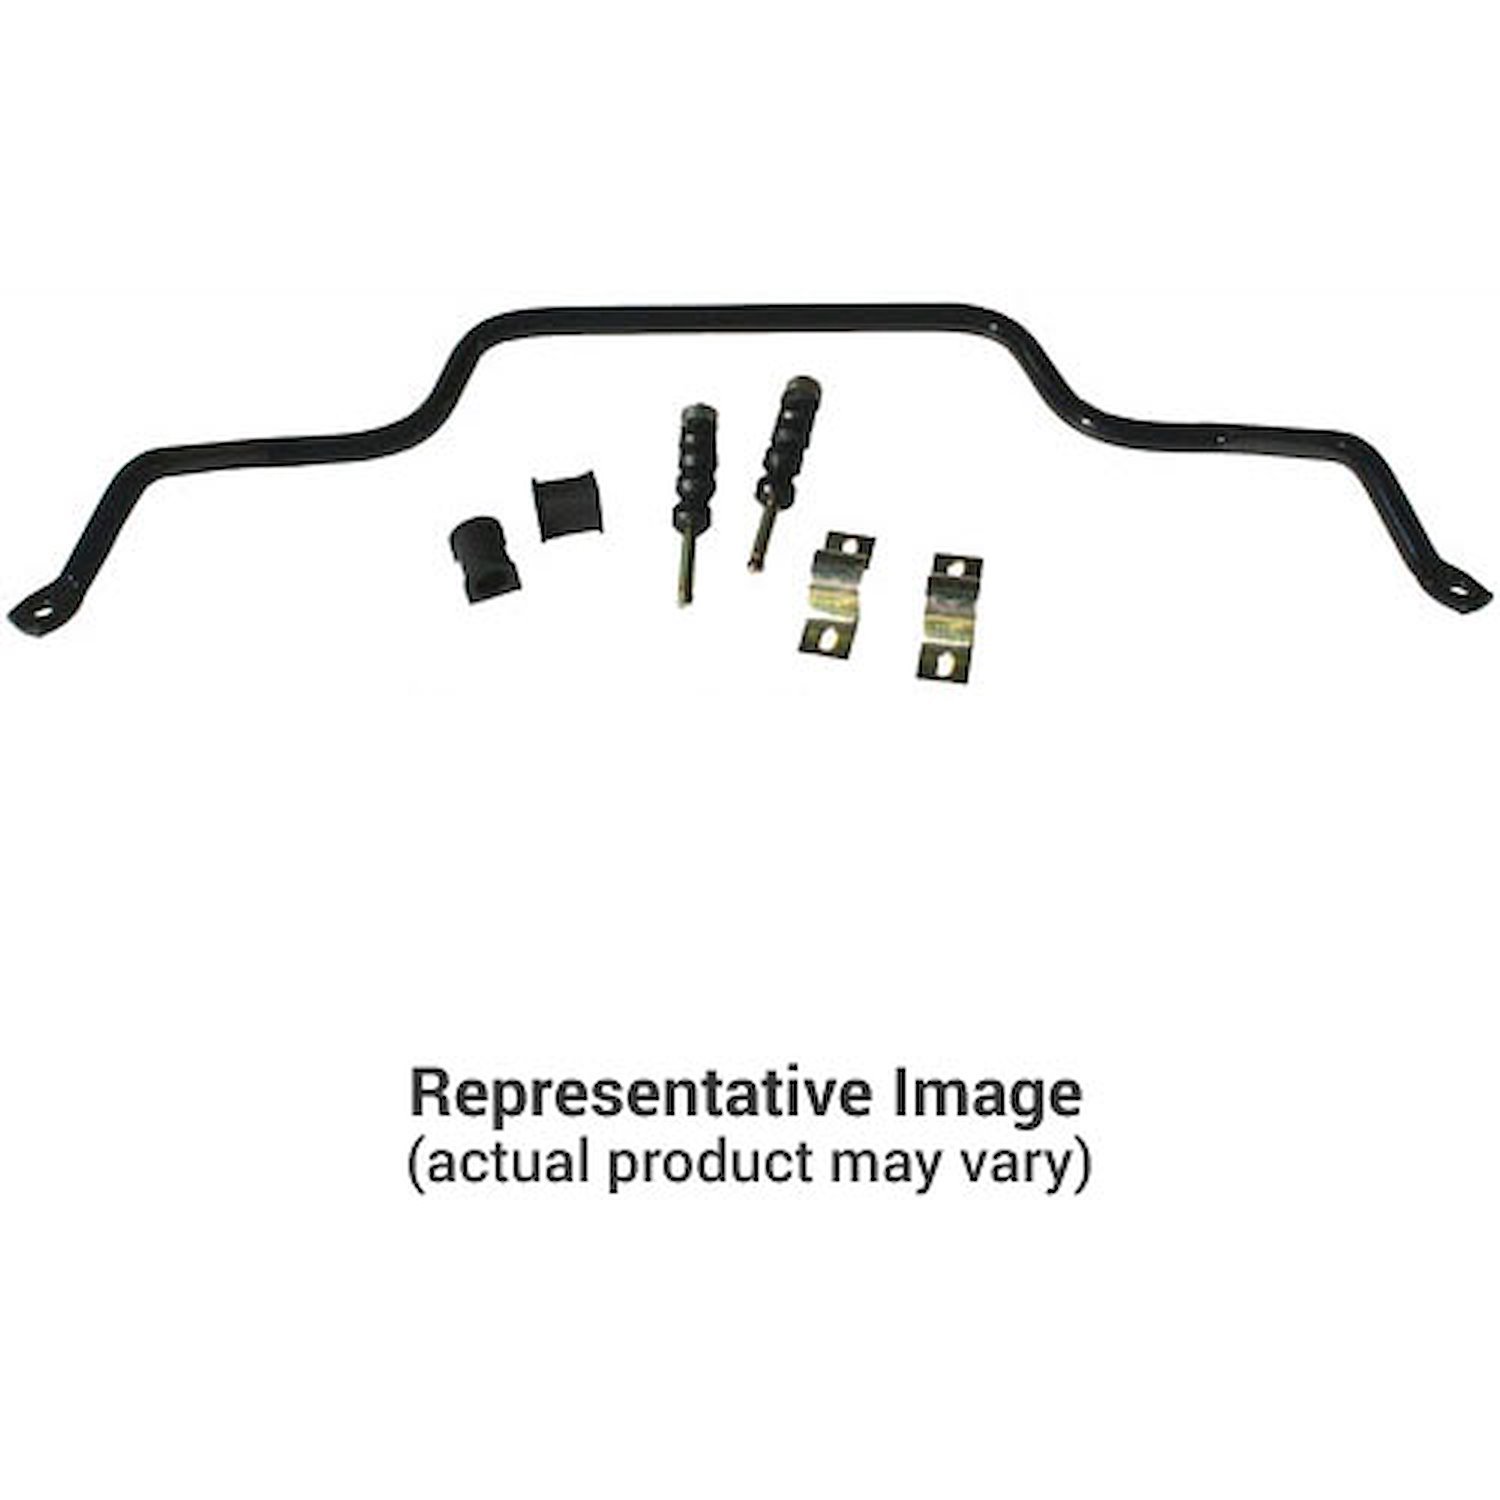 1 1/8" Front Sway Bar 1969-78 Ford Full Size